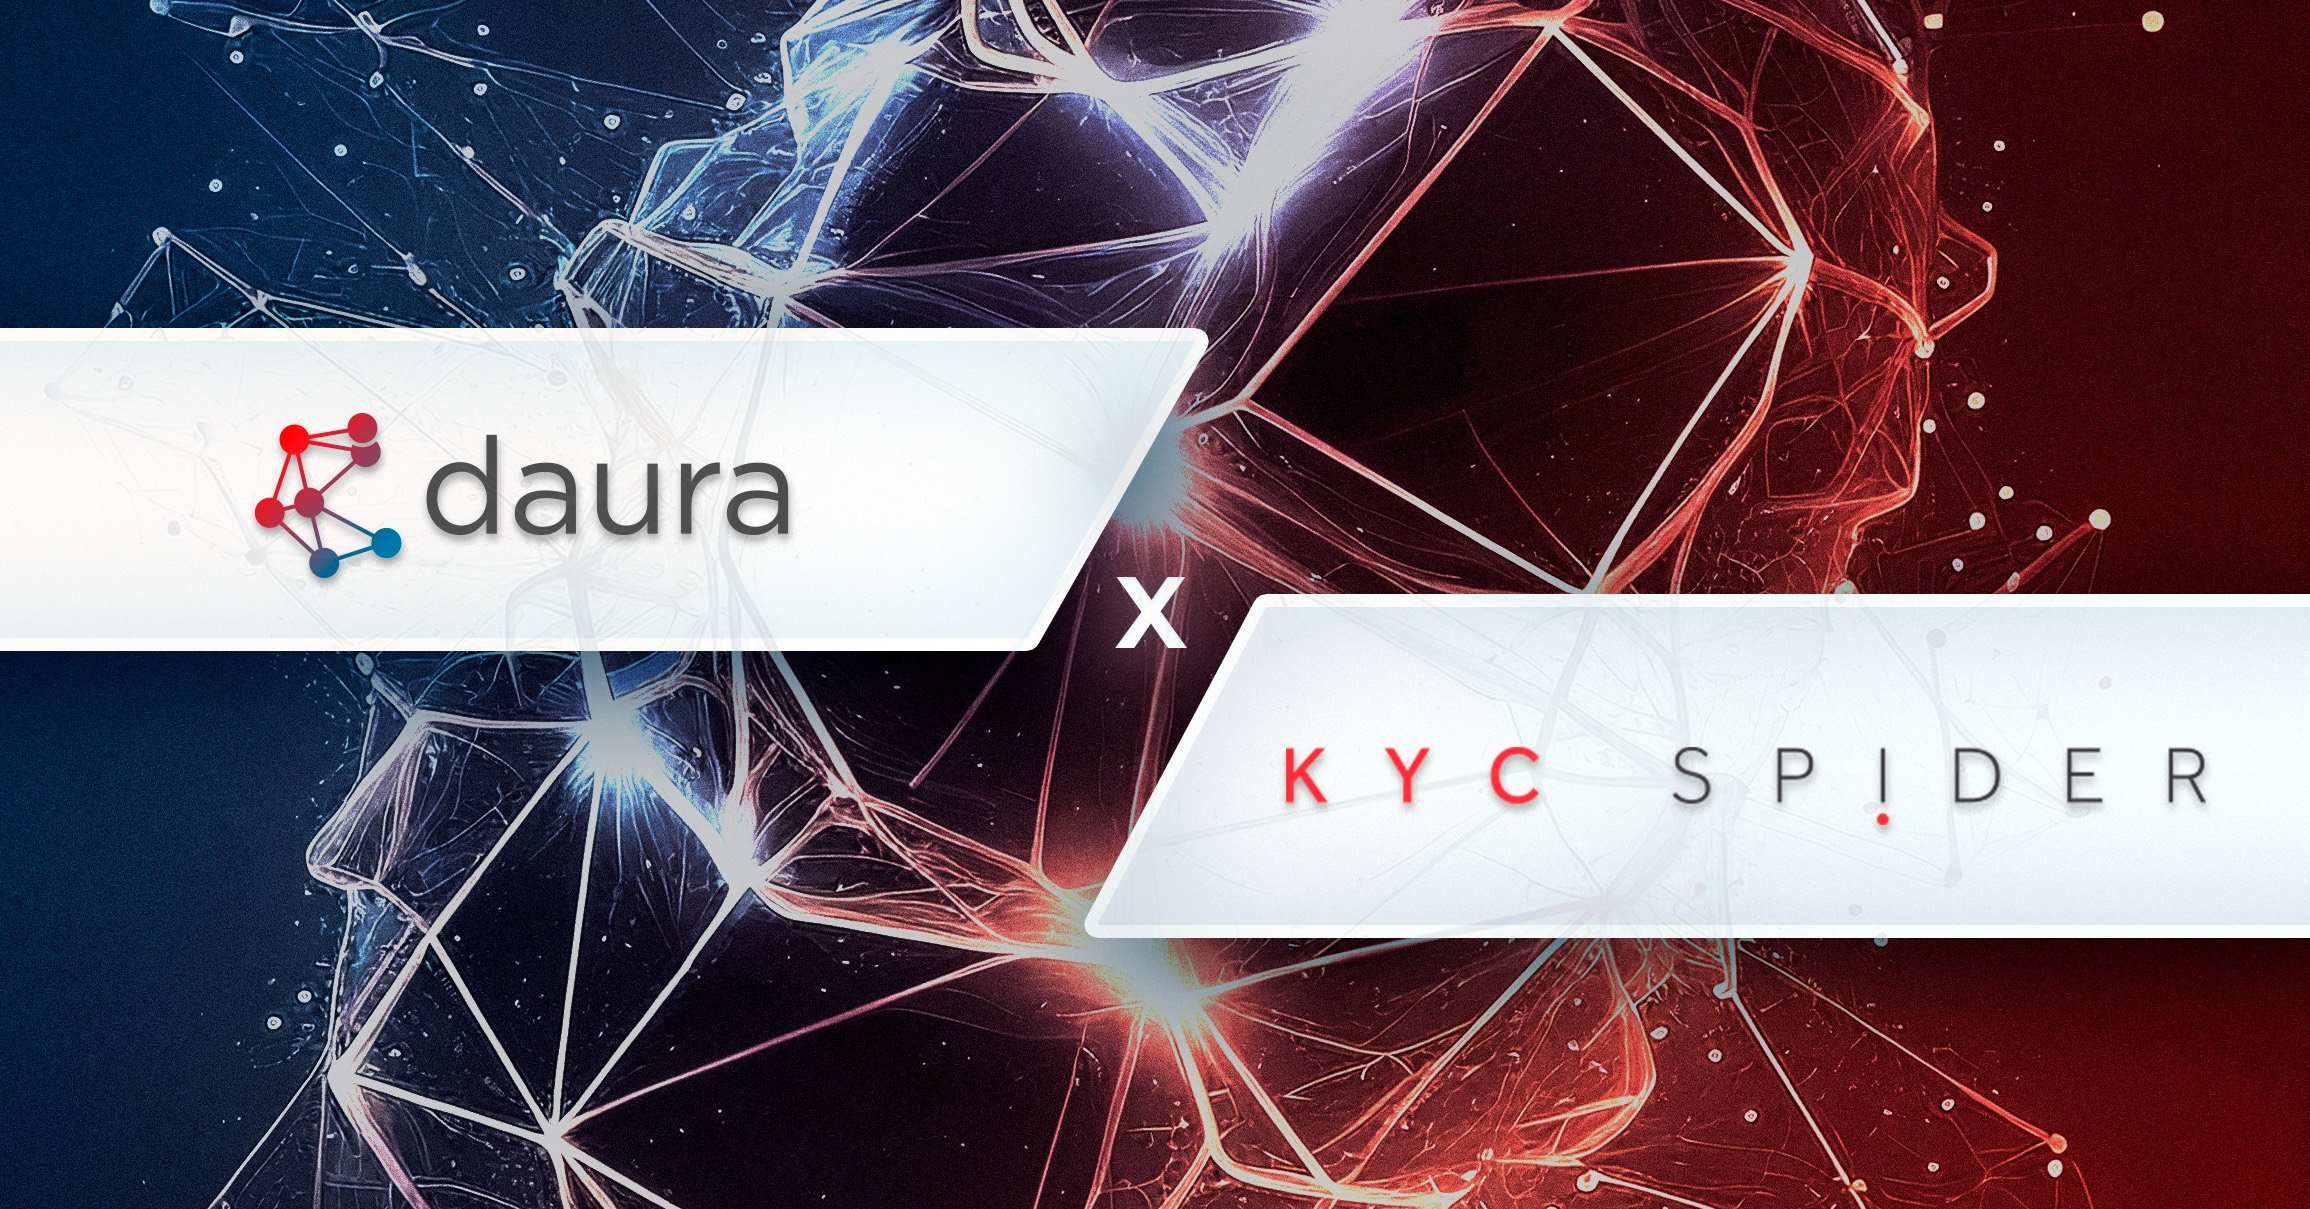 kyc_spider-announcement-visual copy-2